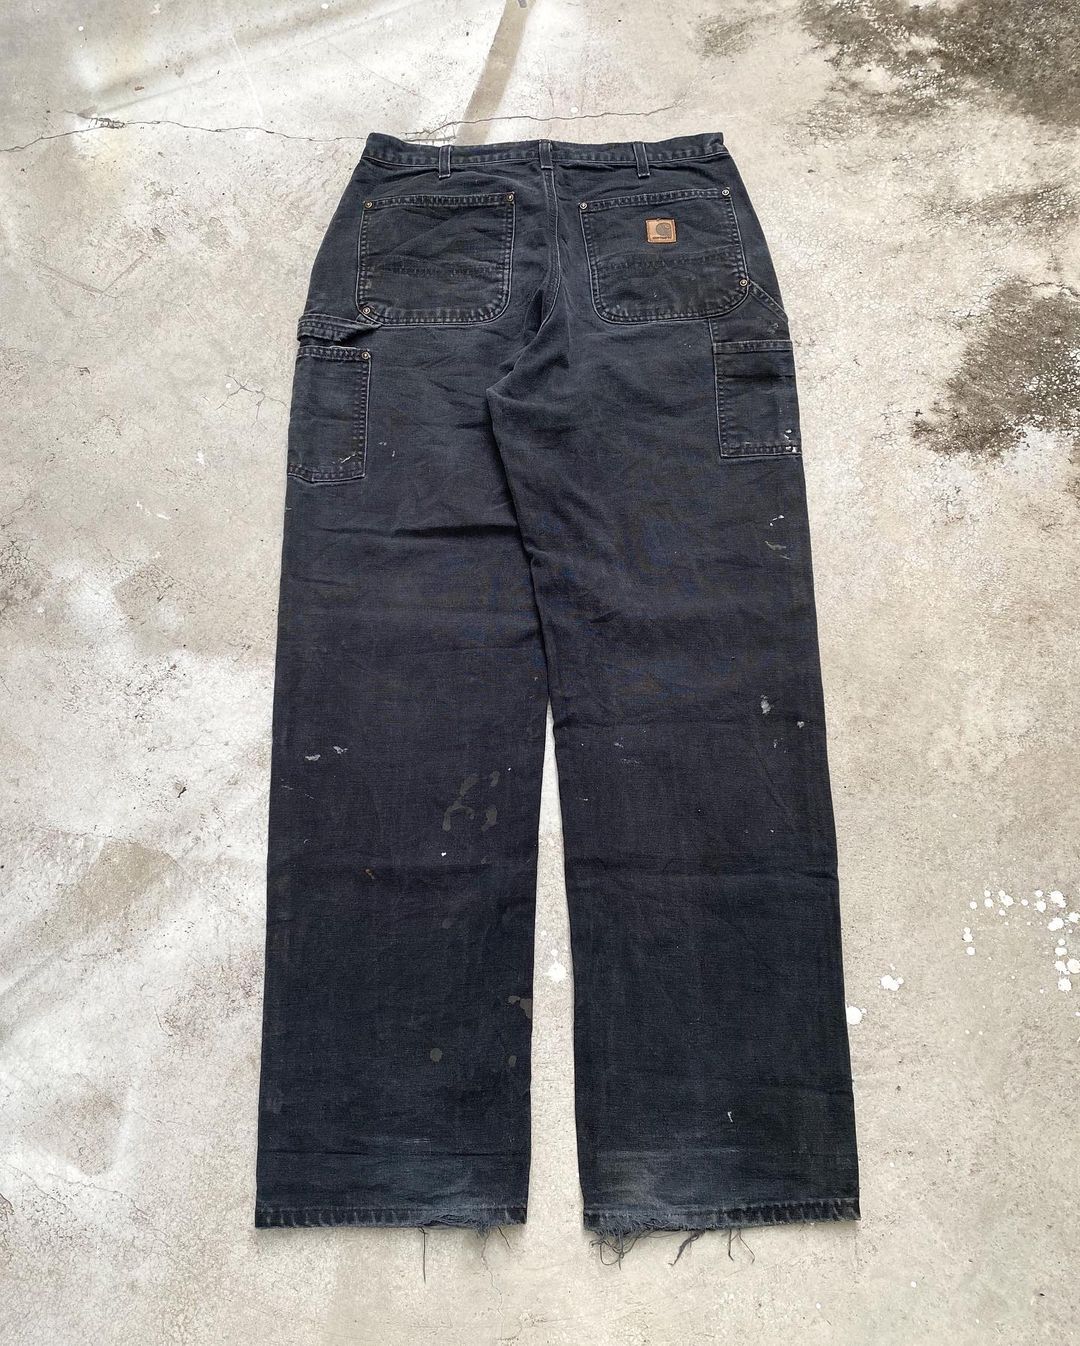 1990s Painted Carhartt Double Knee Pants